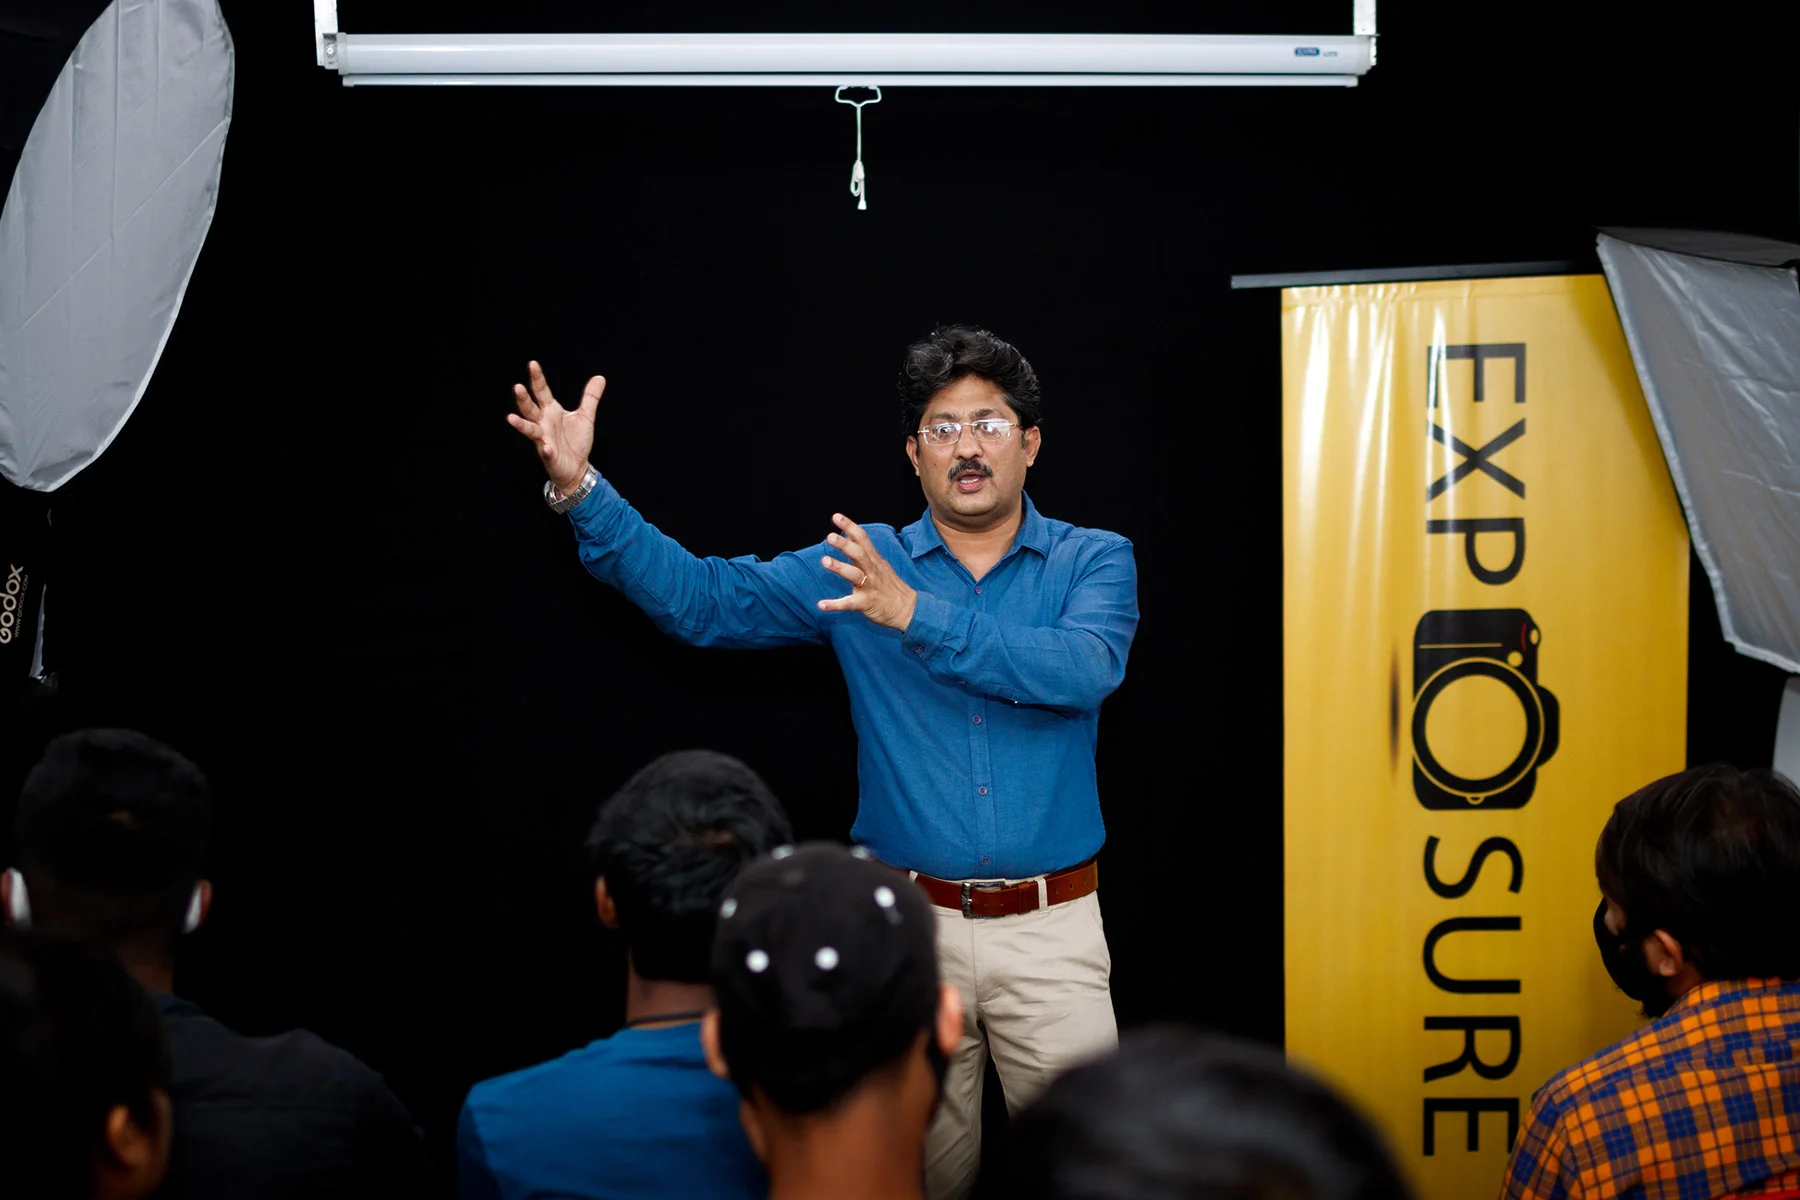 Apratim Saha is taking sessions at Exposure - The School Of Photography